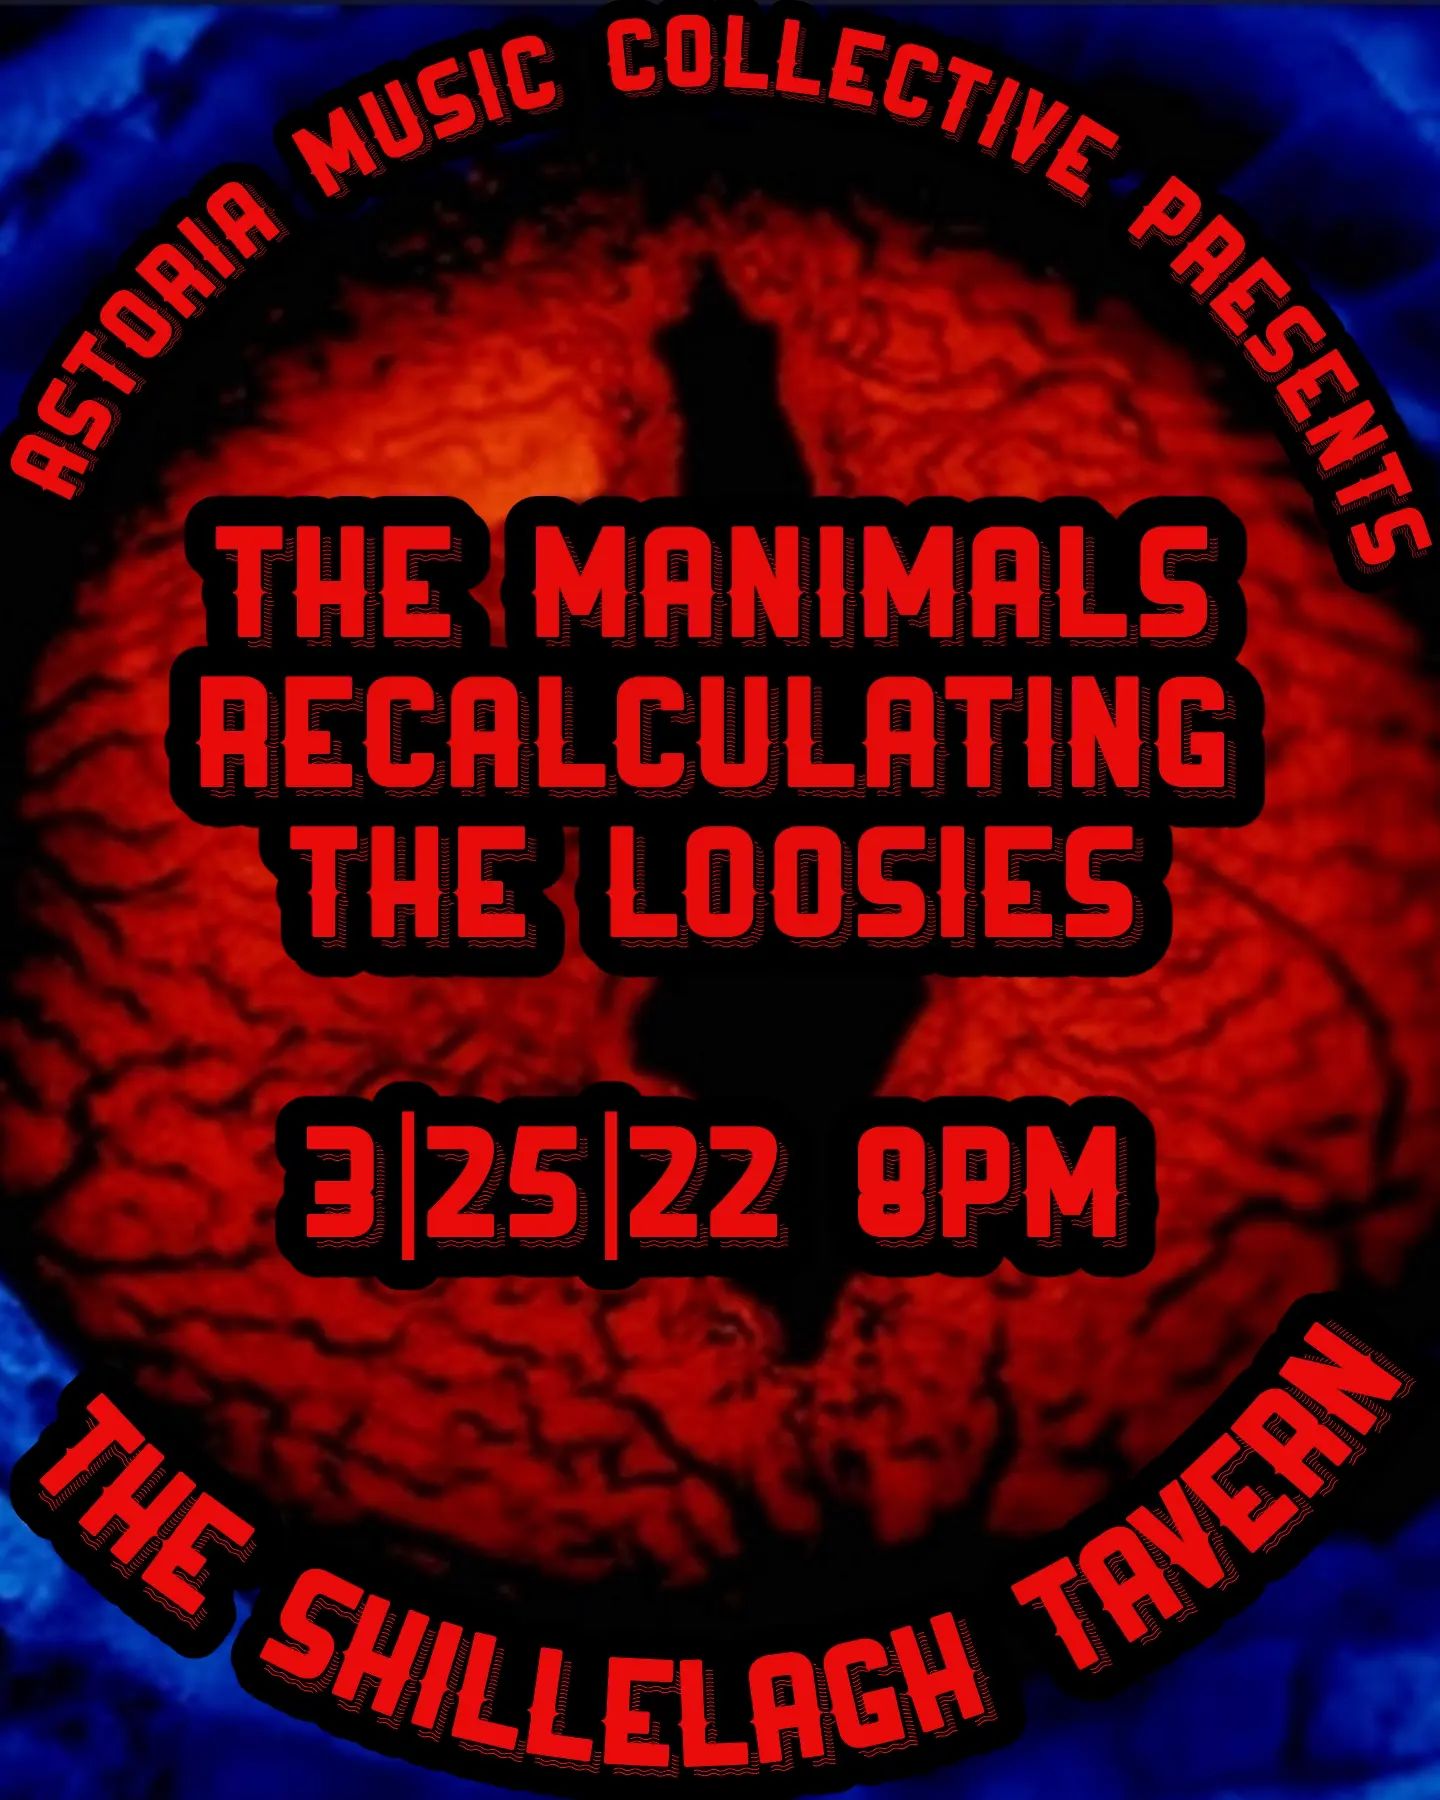 Manimals, Recalculating and The Loosies, Shillelagh Tavern, March 25, 2022